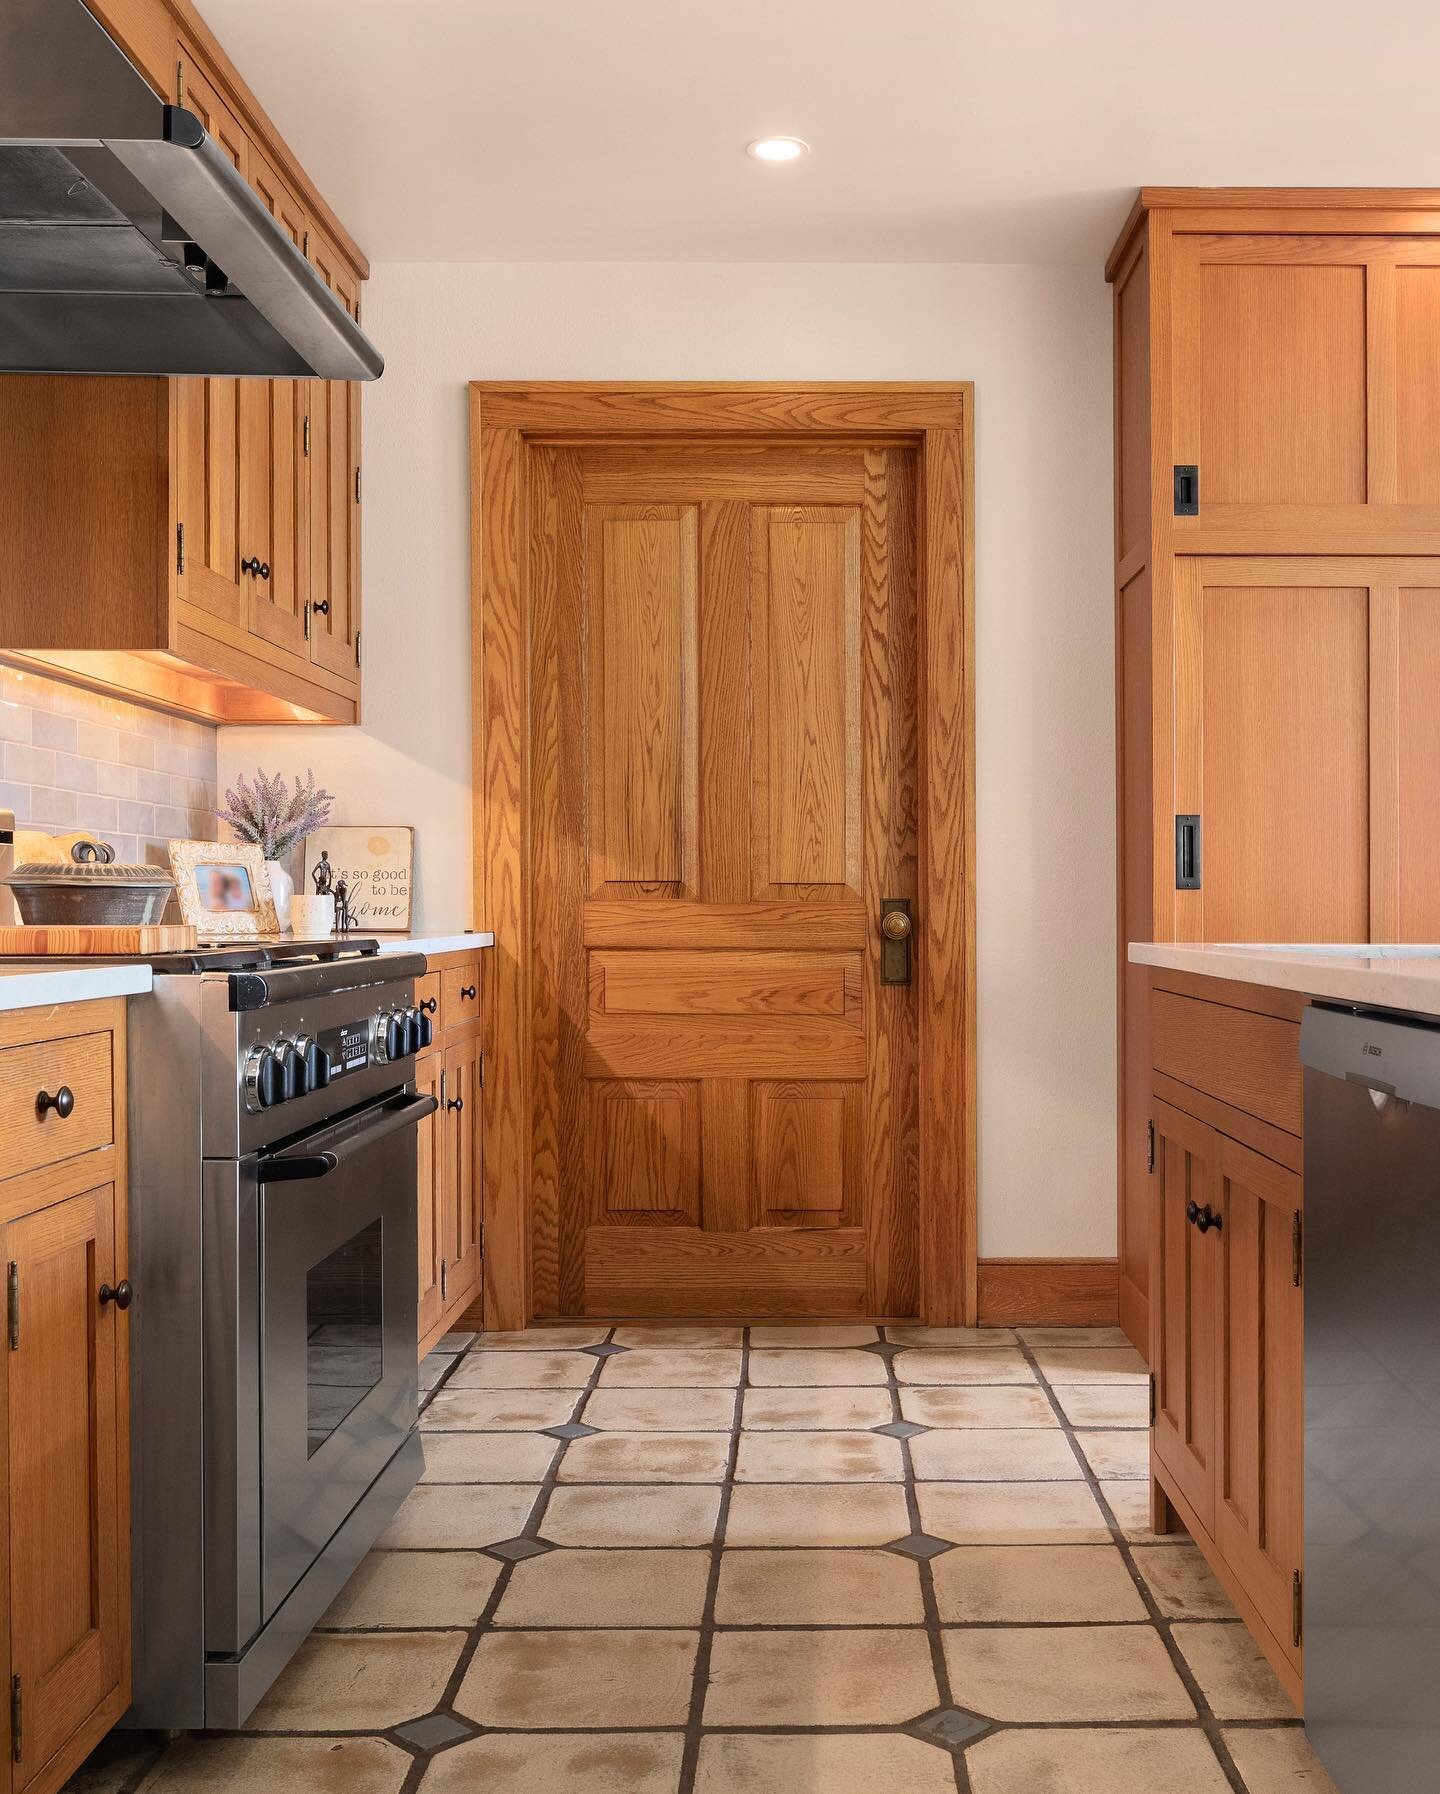 Before &amp; After

A thank you note, the door that was held, a local flower delivery, the bistro waitstaff knowing your name, working with a team that &ldquo;gets it,&rdquo; a just-because call from an adult child, and - this custom built-in pantry 